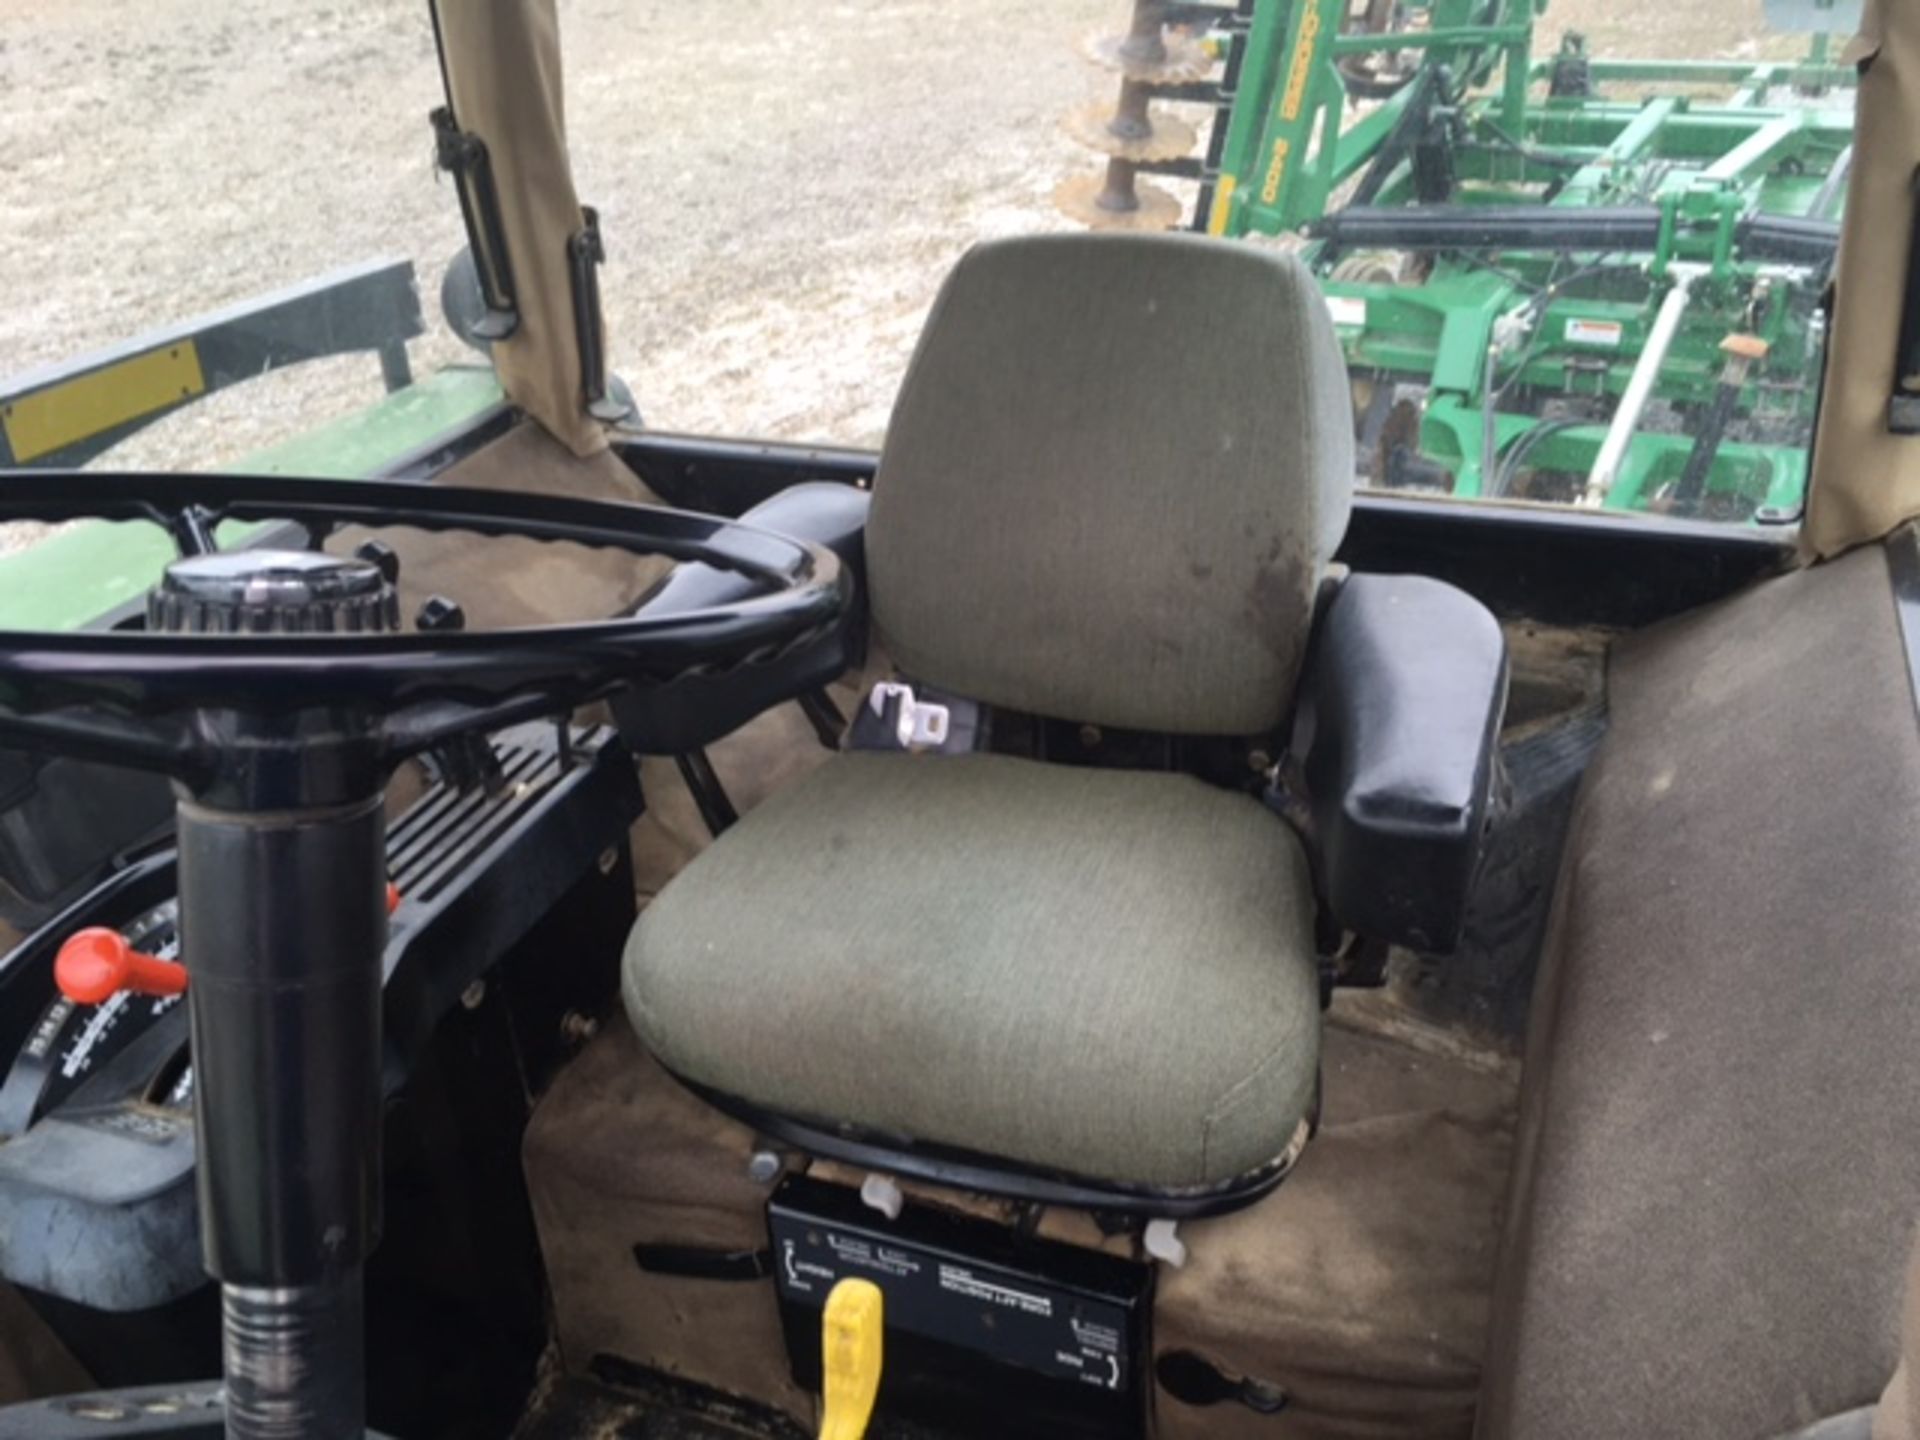 John Deere 4555 Tractor, MFWD, weights, duals, 15 speed powershift, 3pt., 3 hyd. remotes, big 1000 - Image 10 of 13